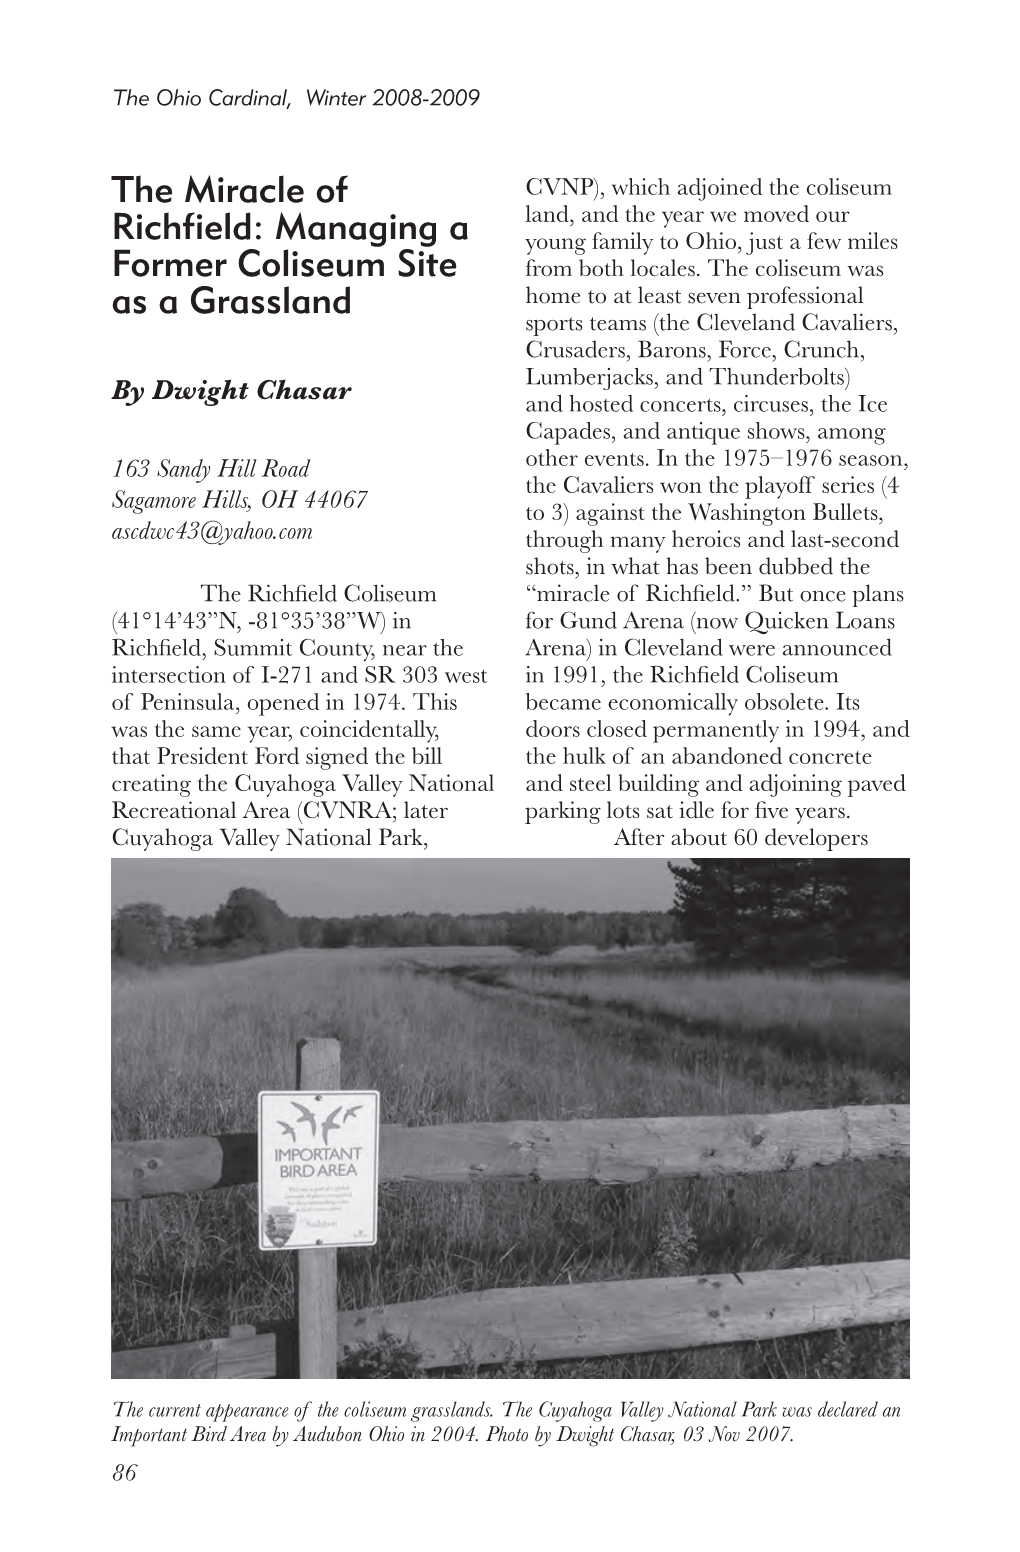 The Miracle of Richfield: Managing a Former Coliseum Site As a Grassland